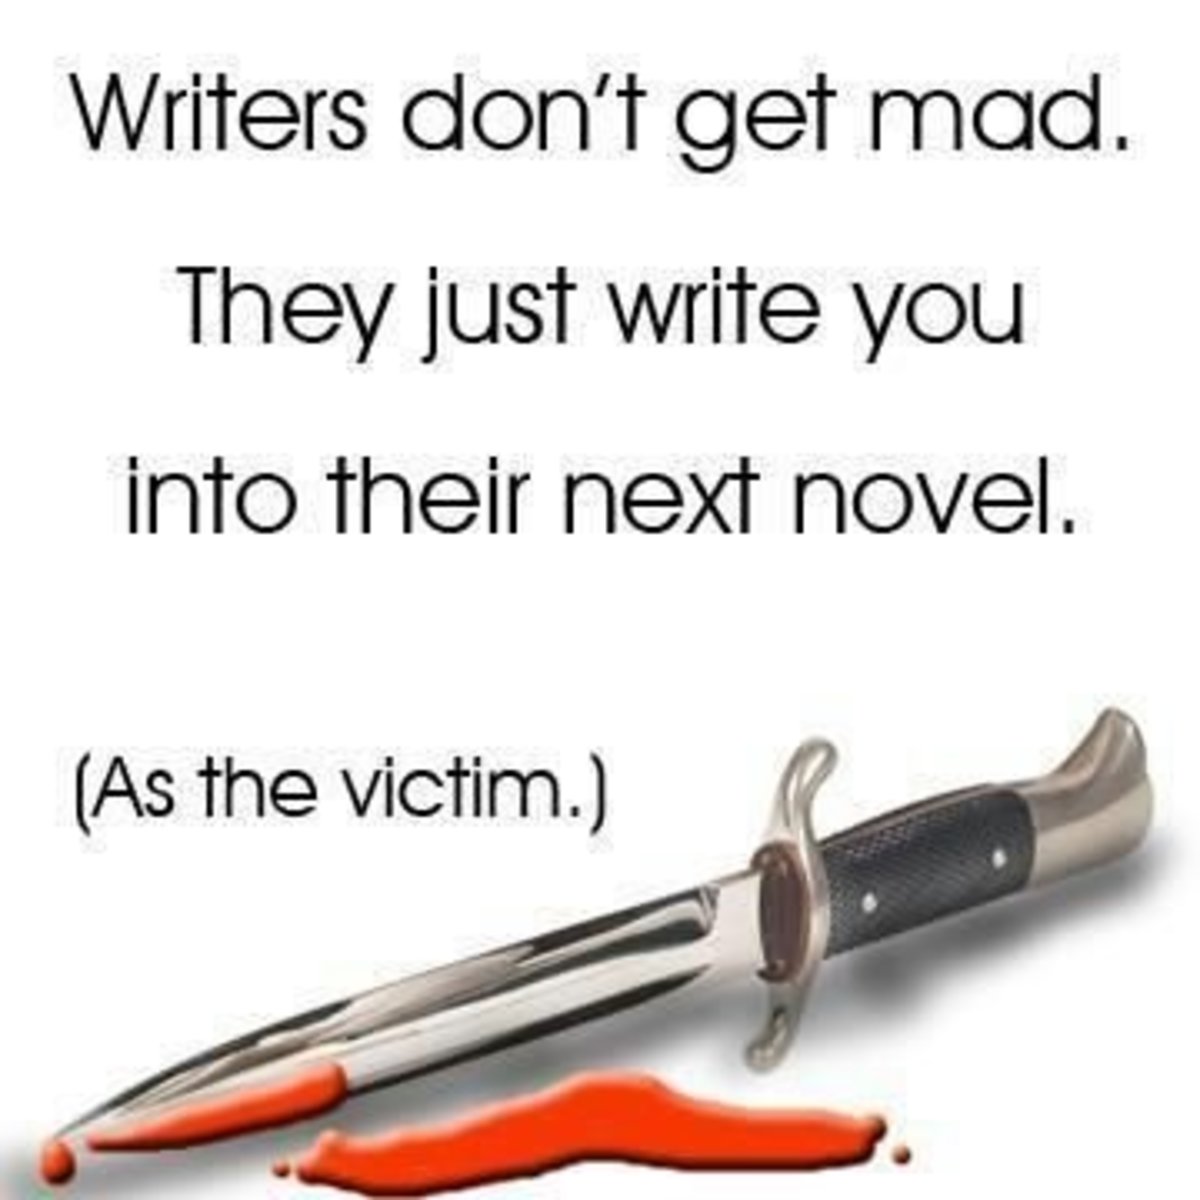 Writers don't get mad...We stab